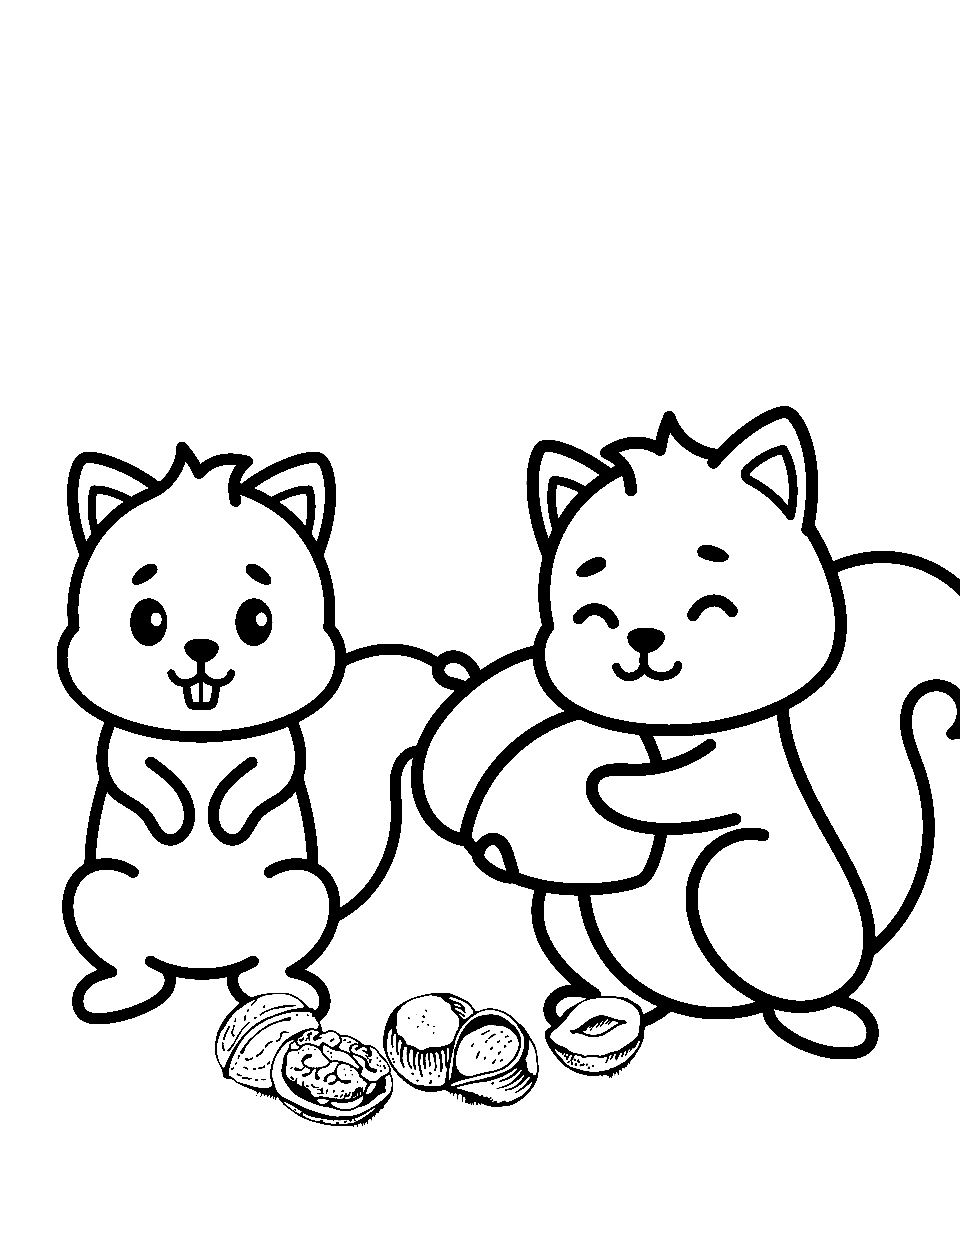 Cute Squirrels Coloring Page - Squirrels collecting nuts for winter.